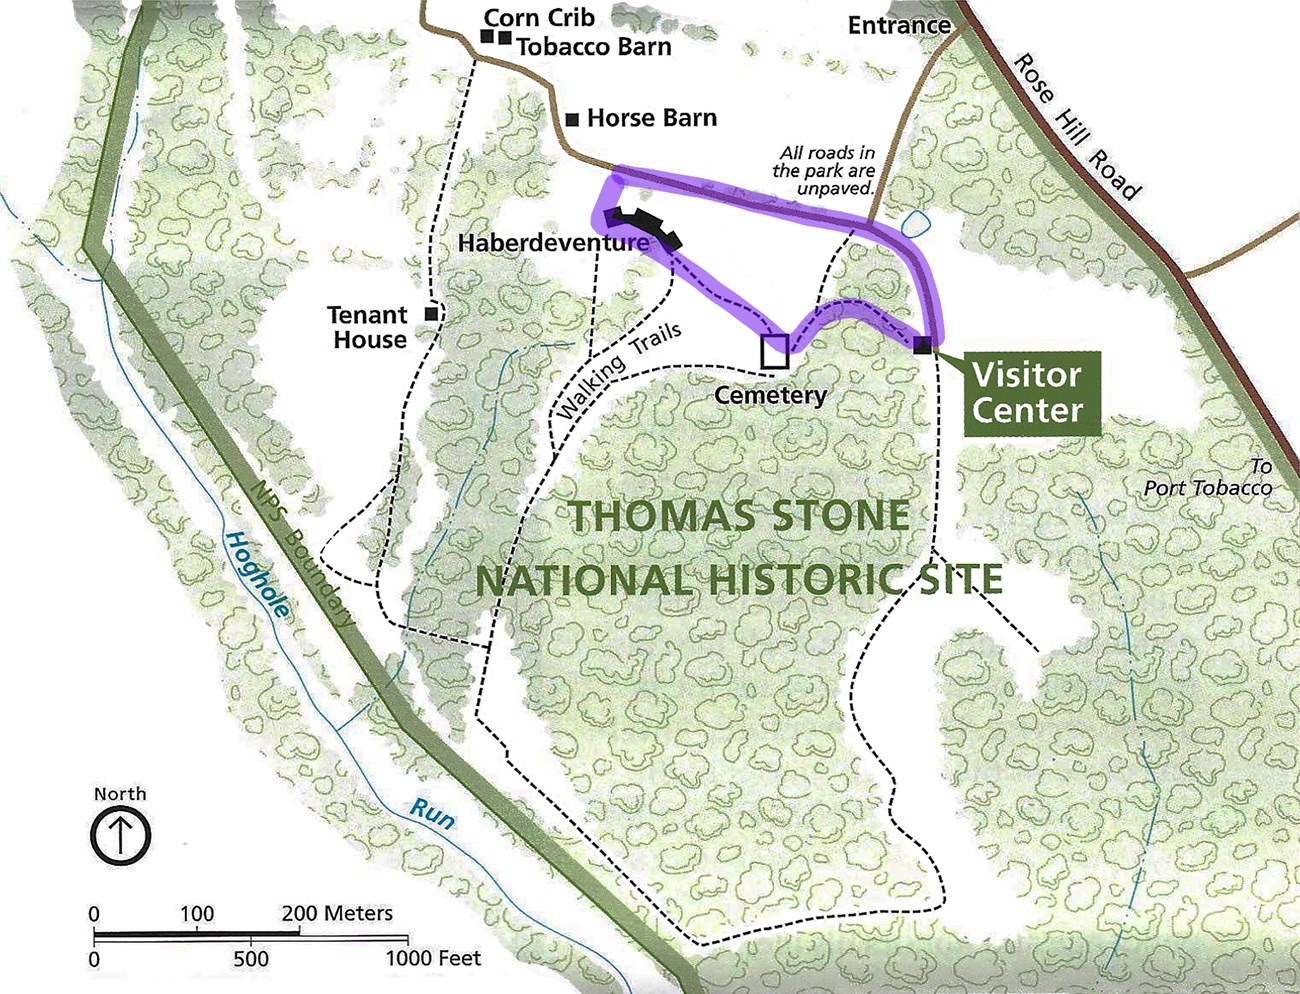 Map image showing cemetery and Thomas Stone House